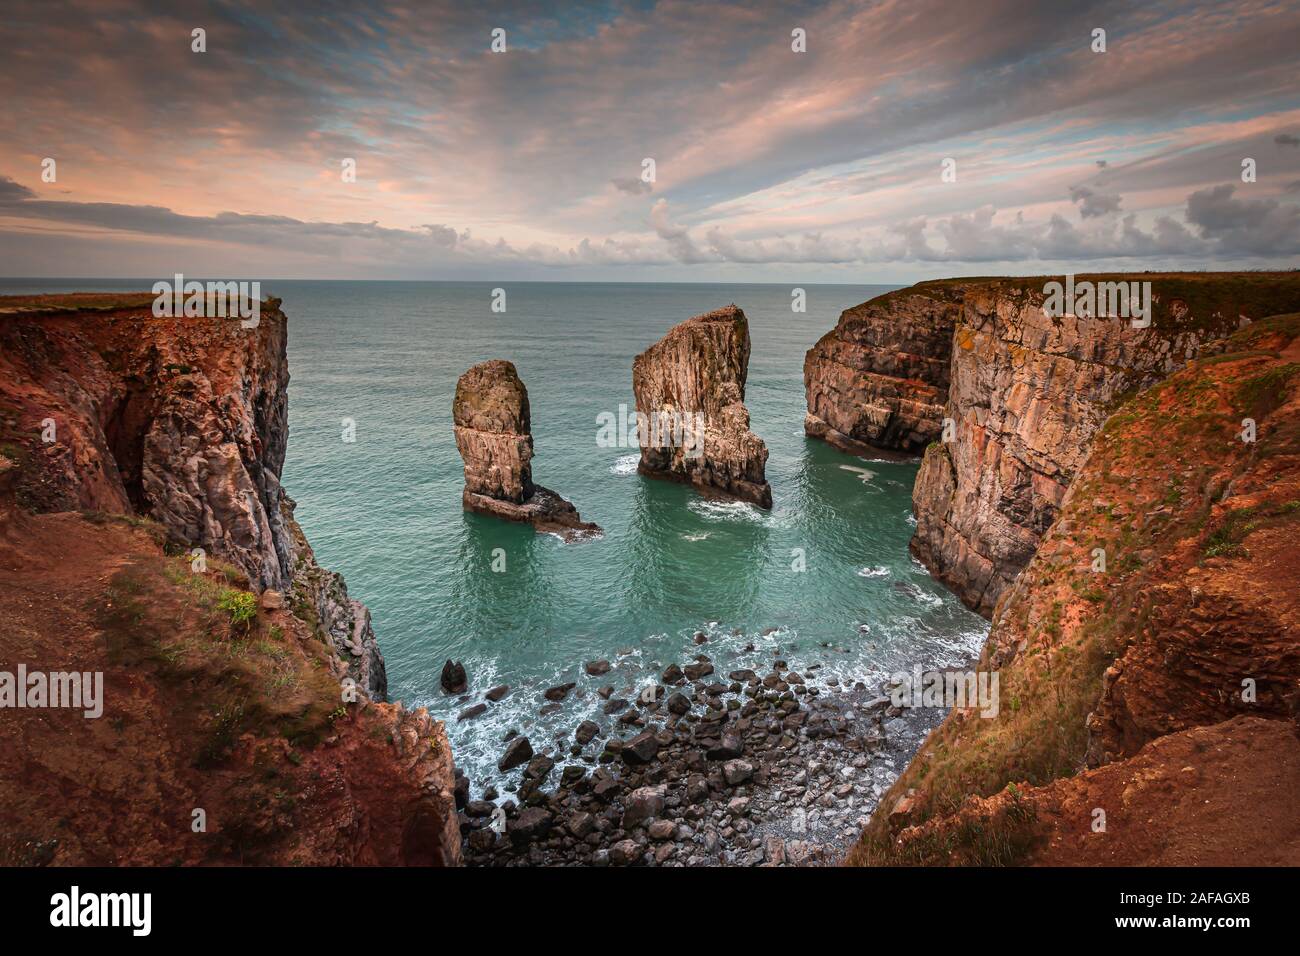 Stack rocks photographed at sunrise on dramatic coastline of Pembrokeshire,South Wales,UK.Moody, colourful sky over bay with turquoise water.Coastline. Stock Photo